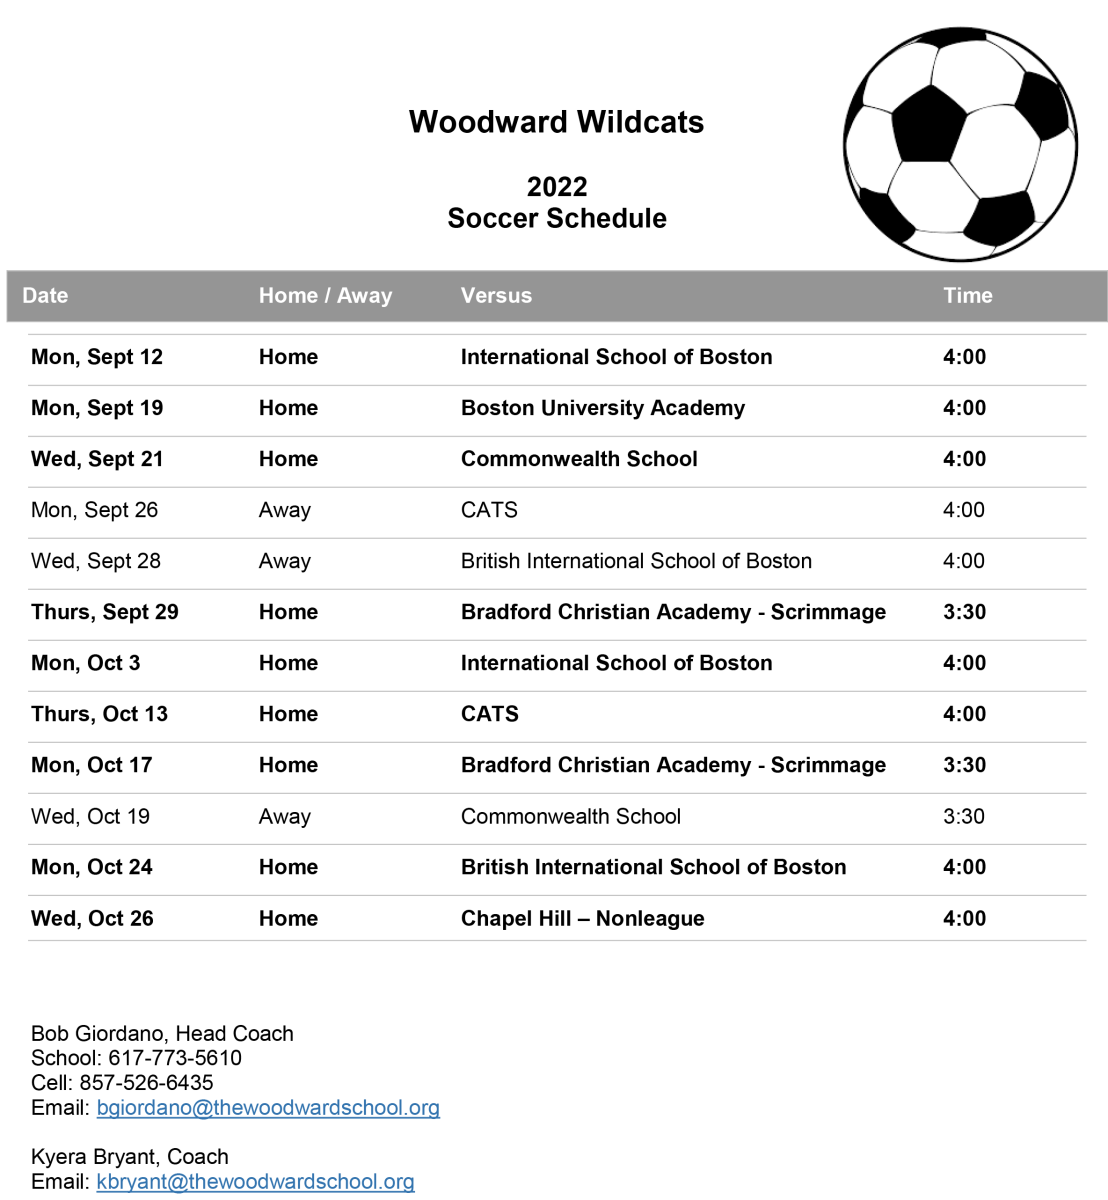 Soccer Schedule with link to PDF